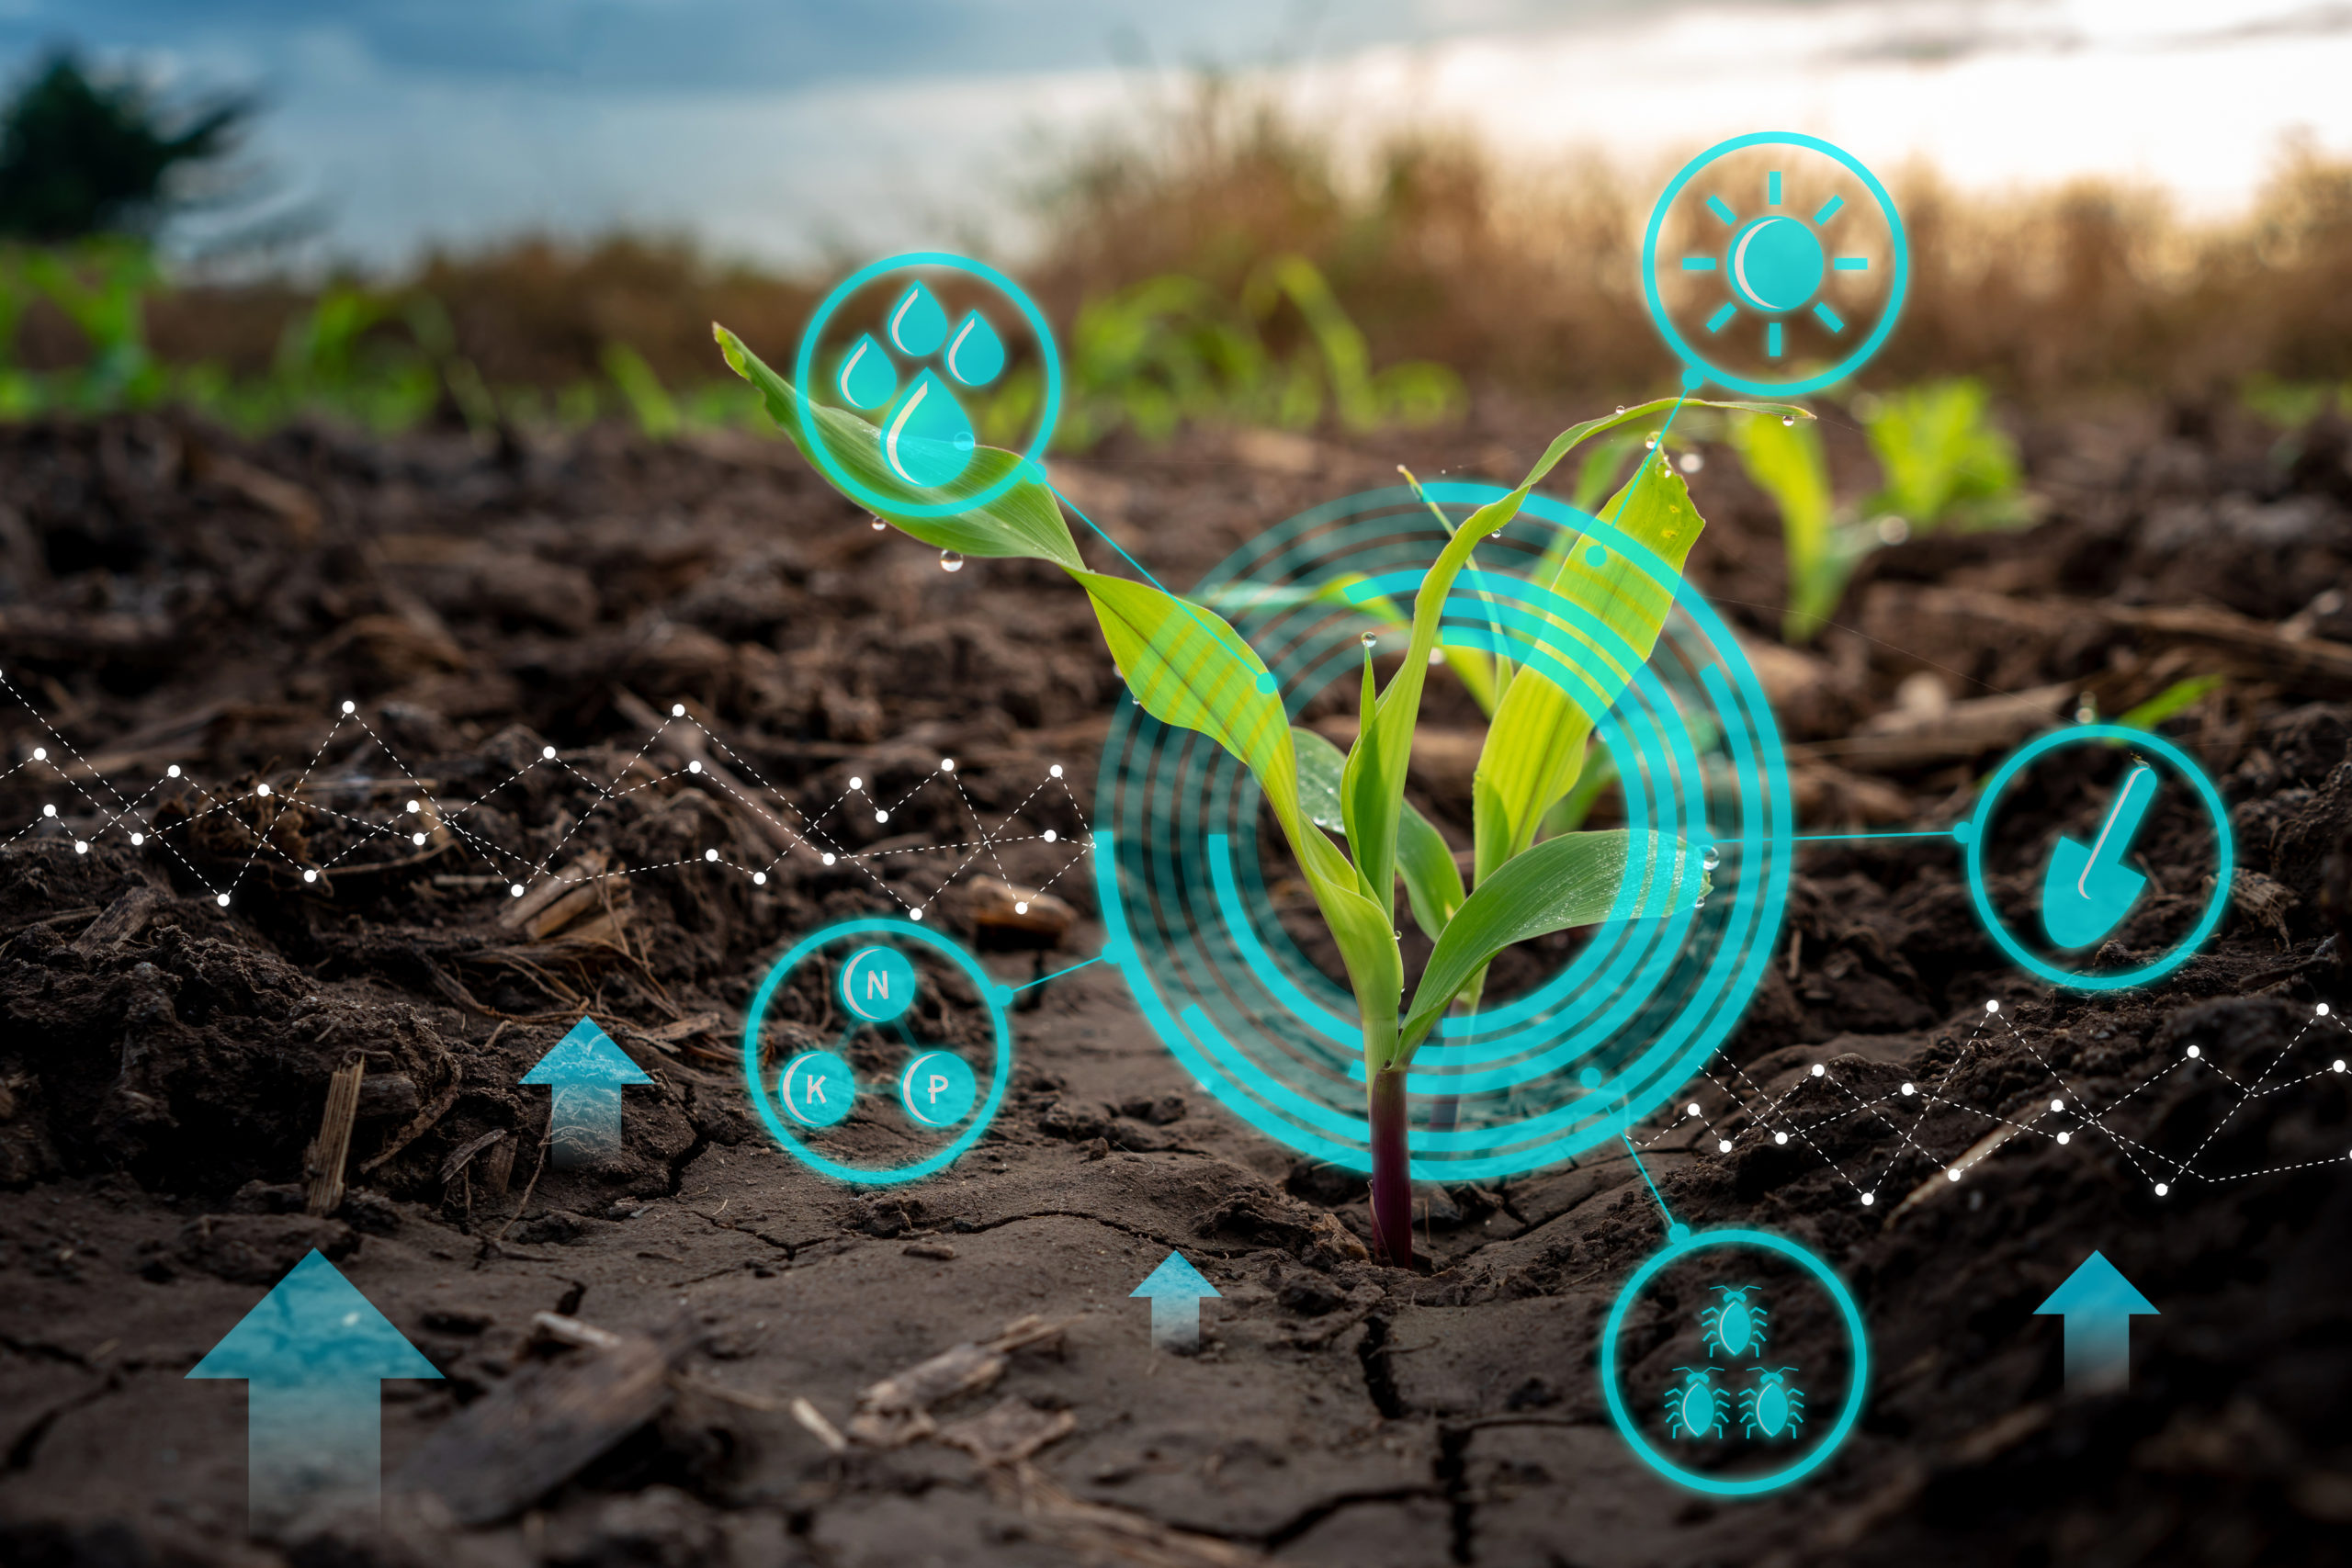 Growing young maize seedling in cultivated agricultural farm field with modern technology concepts including a seedling encircled by digital waves surrounded by technical icons depicting the sun, rain, nutrients, insects and digging utensils and arrows pointing upward from the soil. 